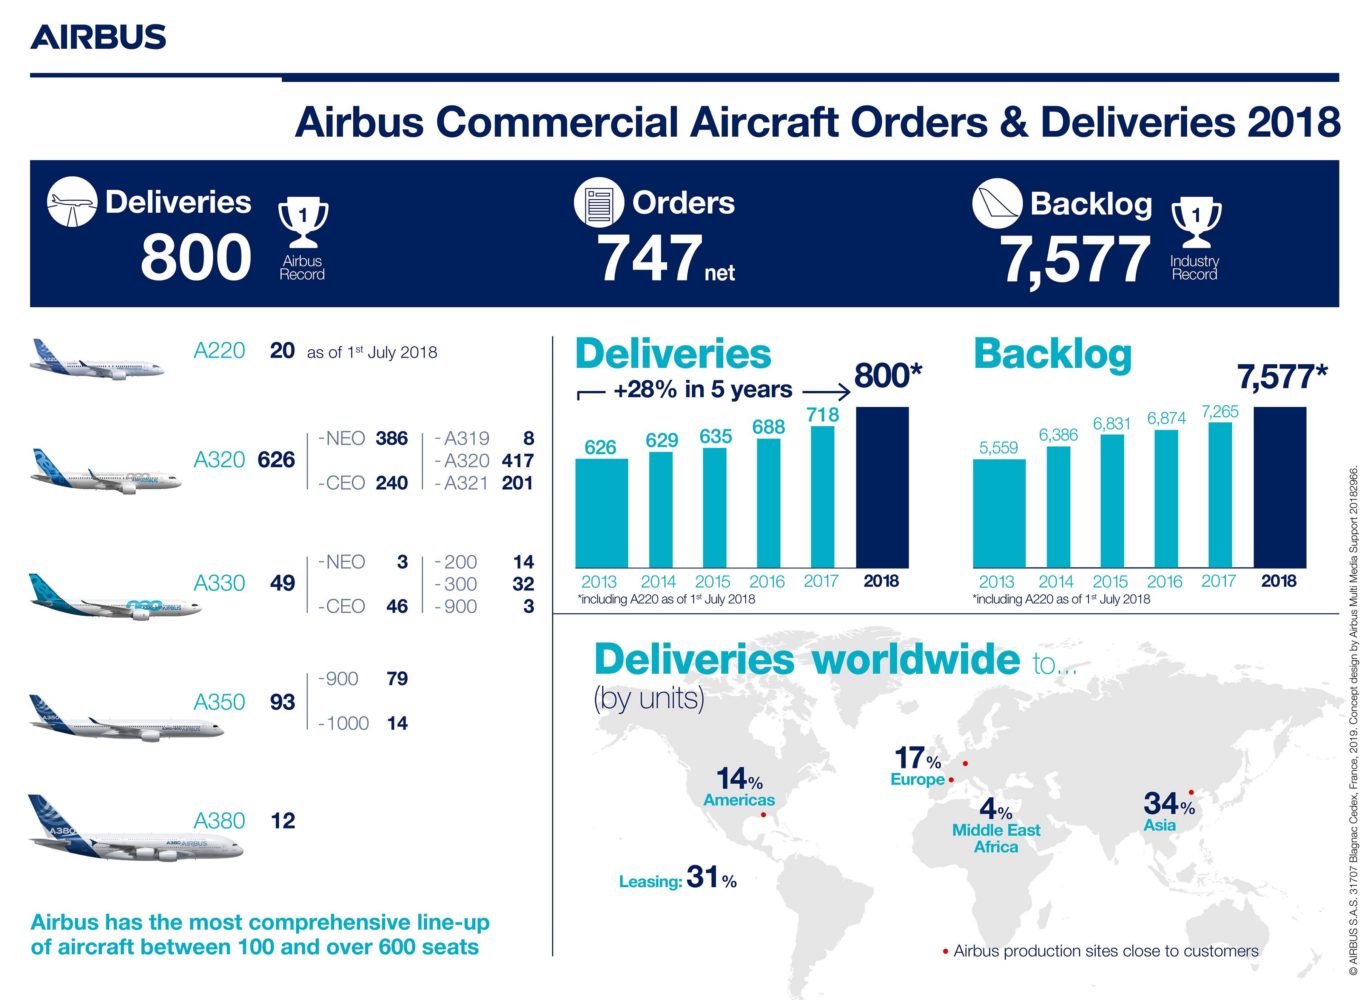 Airbus announces 2018 results